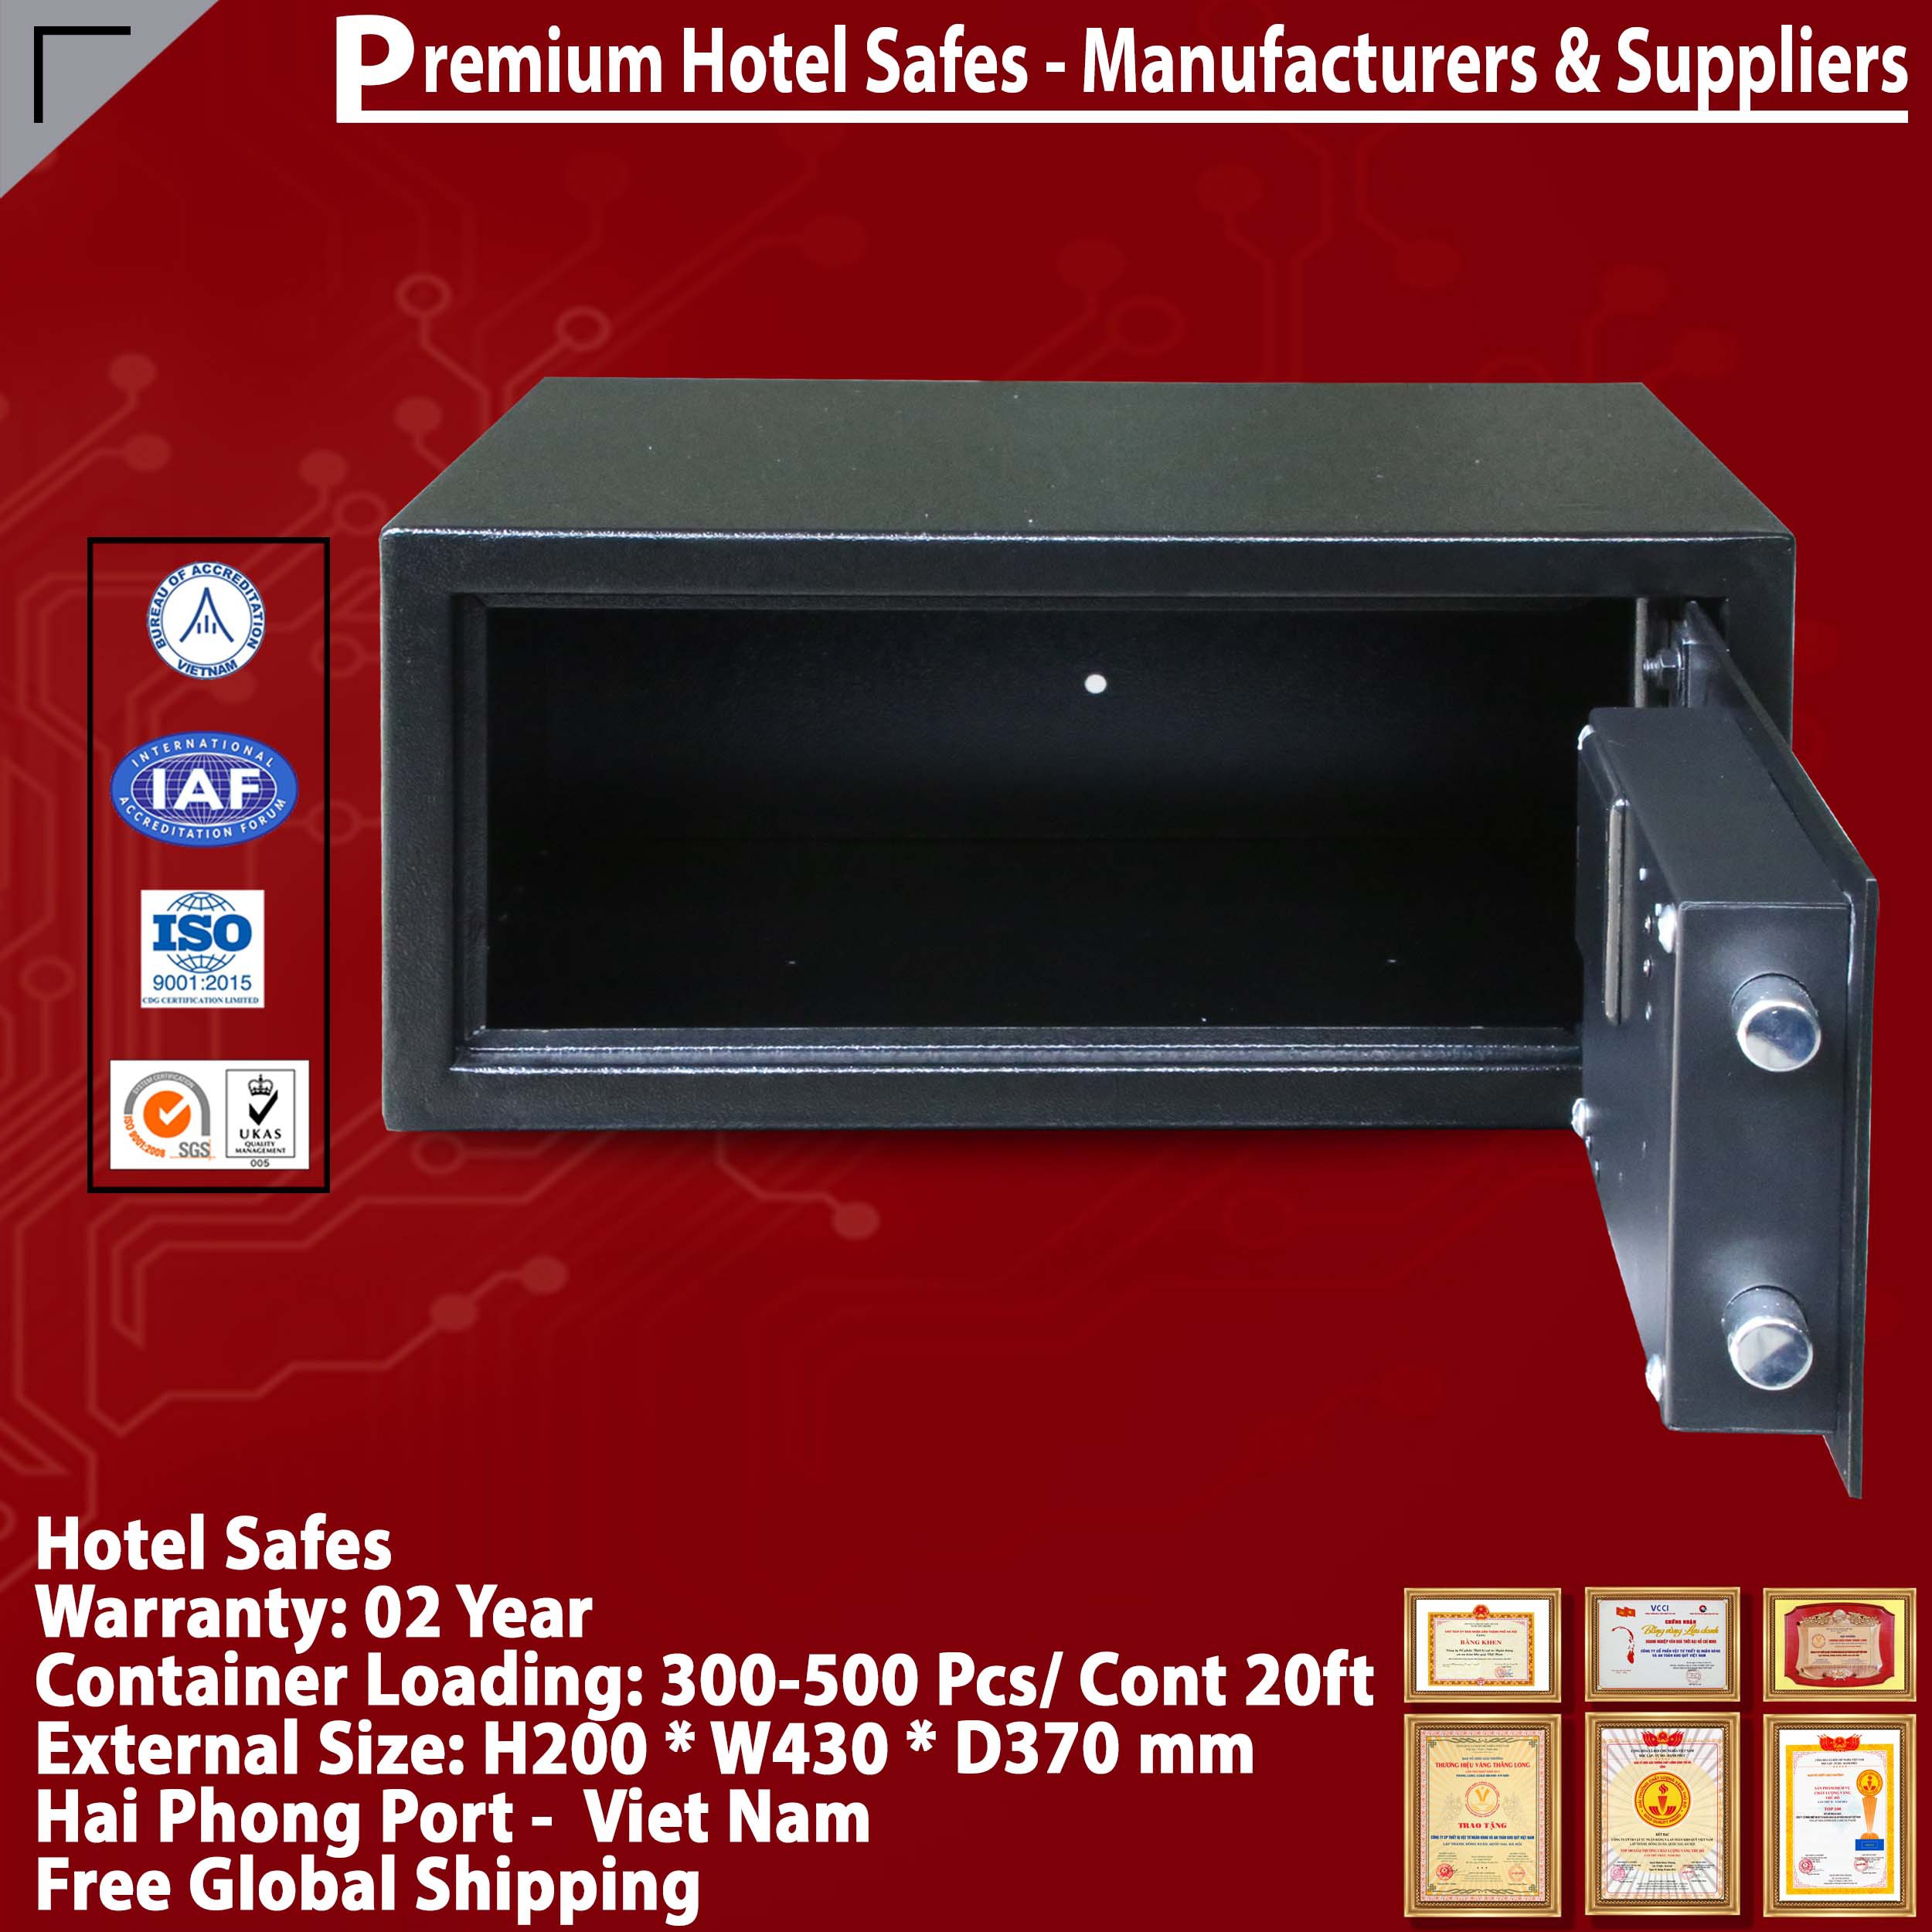 Best Sellers In Hotel Safes Made In Viet Nam